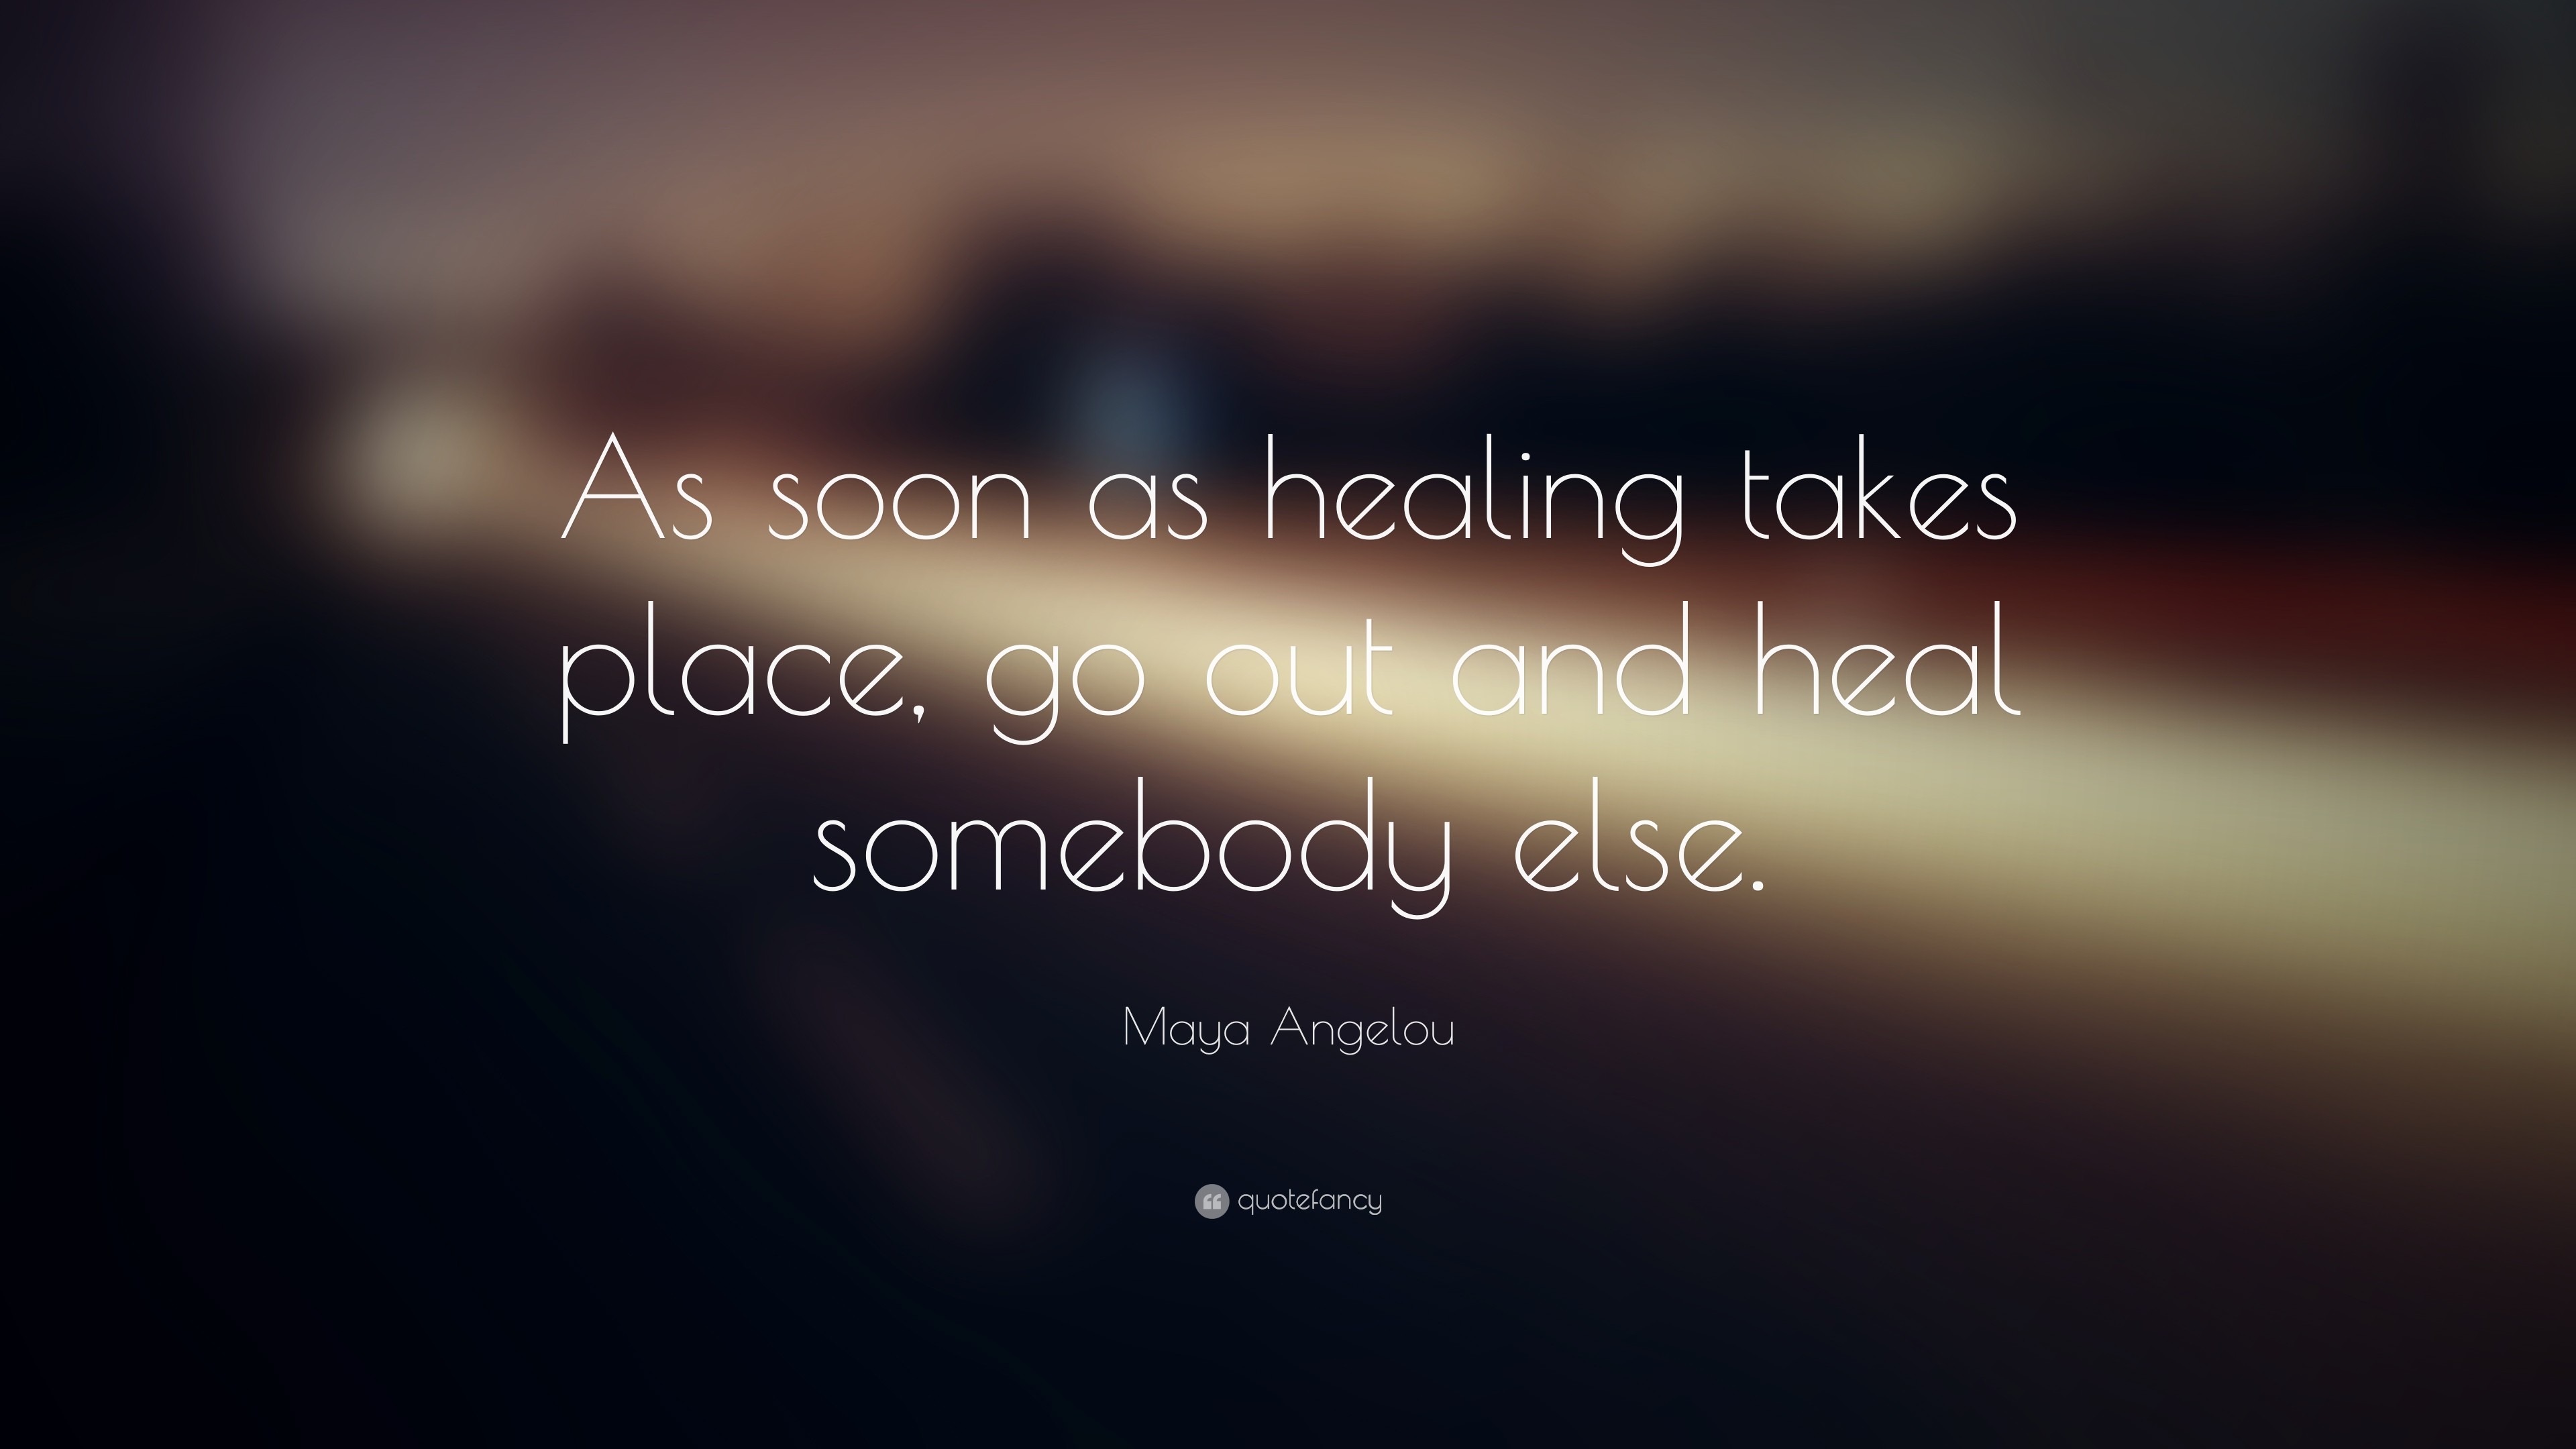 3840x2160 Maya Angelou Quote: “As soon as healing takes place, go out and heal